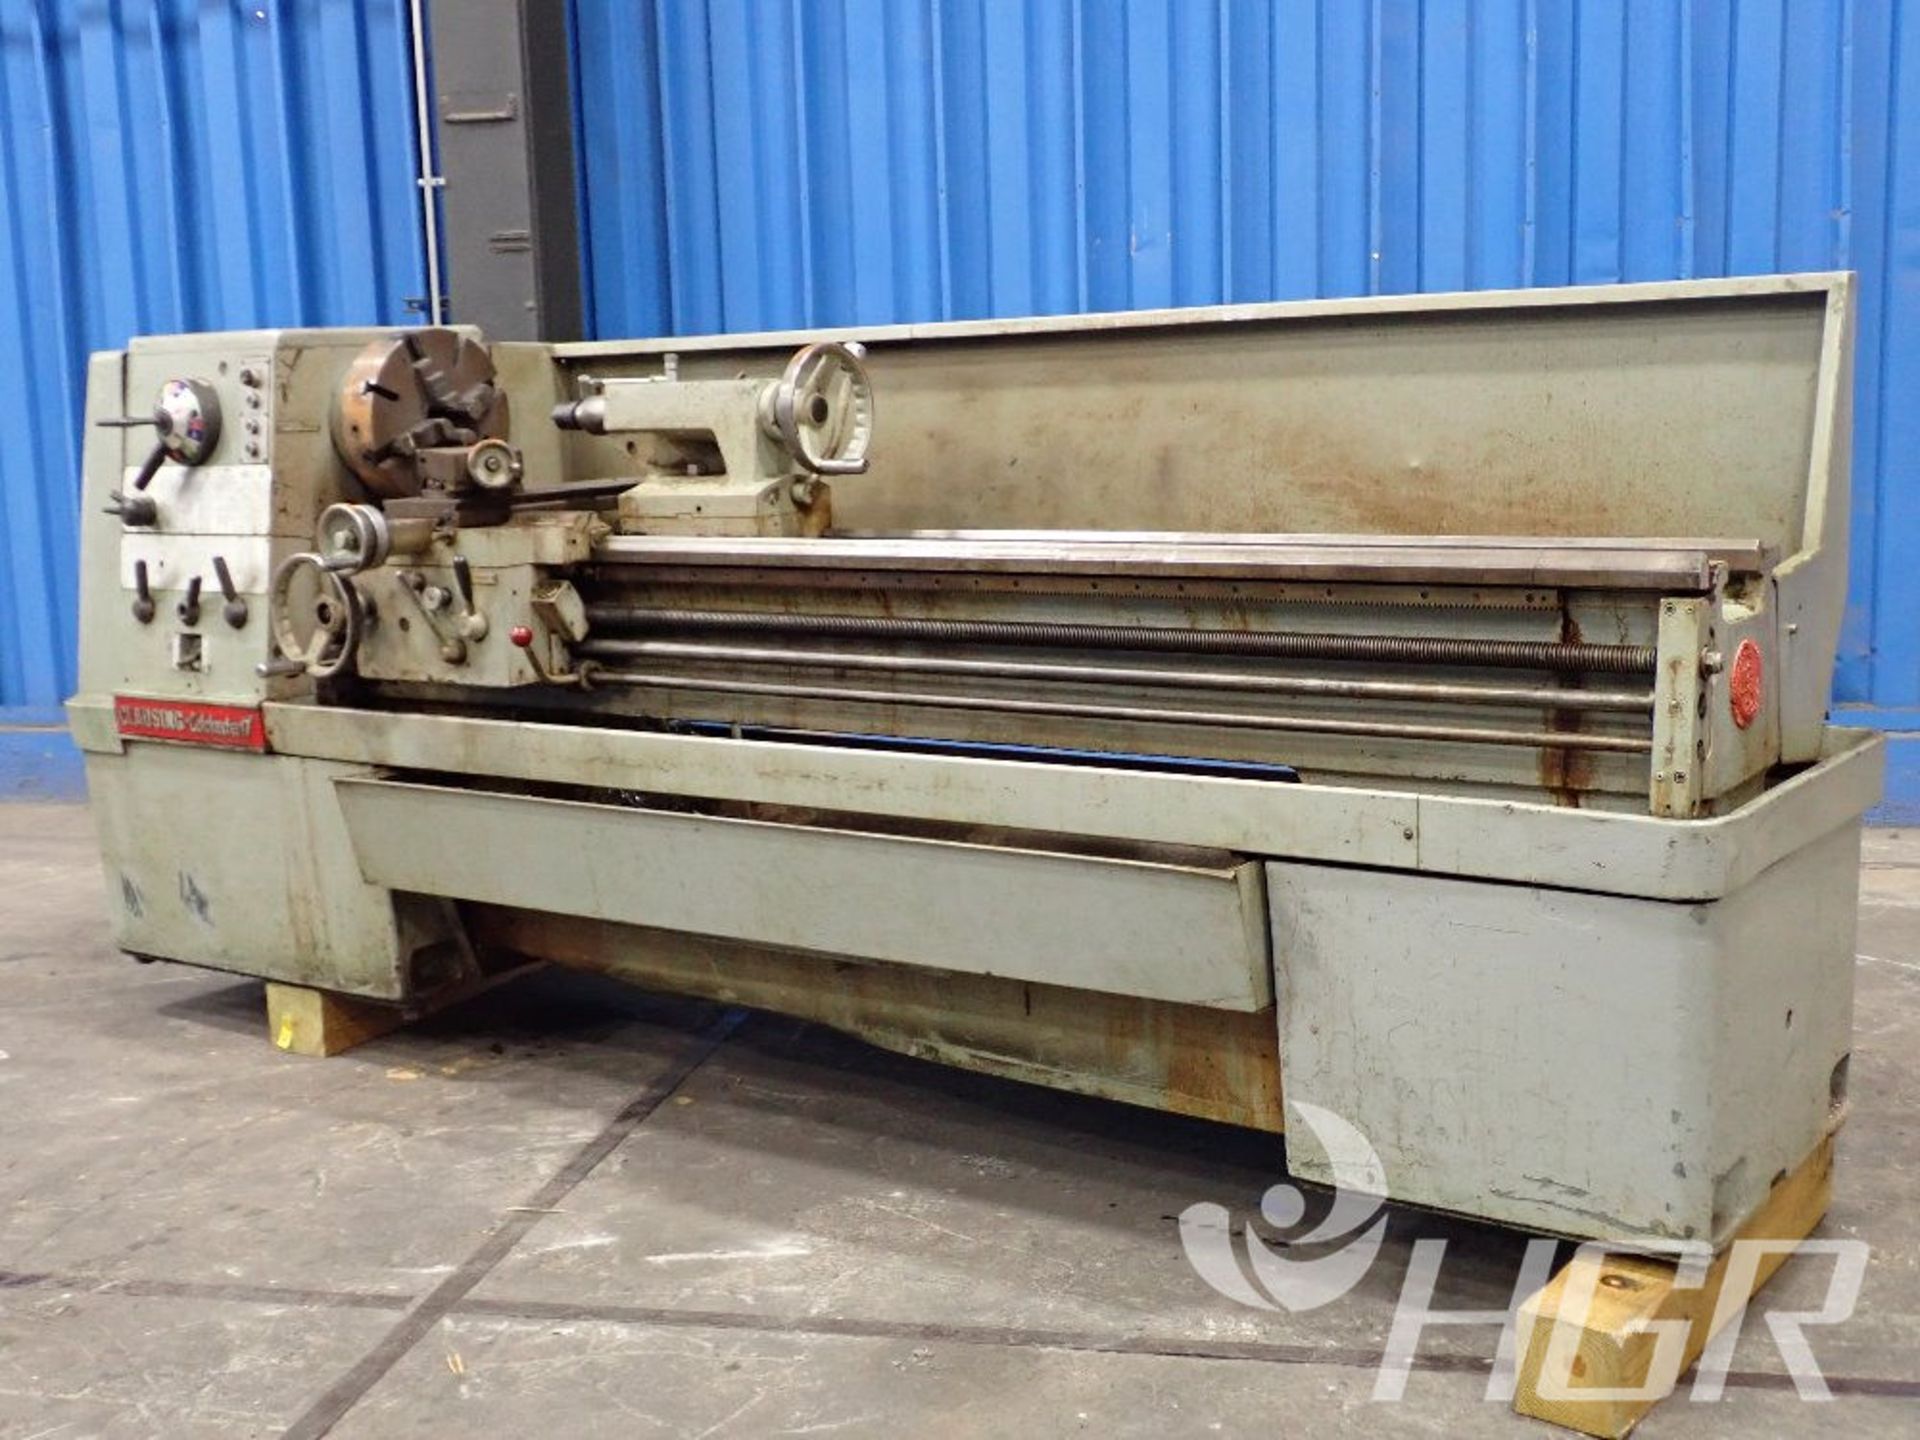 CLAUSING LATHE, Model COLCHESTER 17, Date: n/a; s/n 7/0017/03171, Approx. Capacity: 17"Ãƒâ€”48",